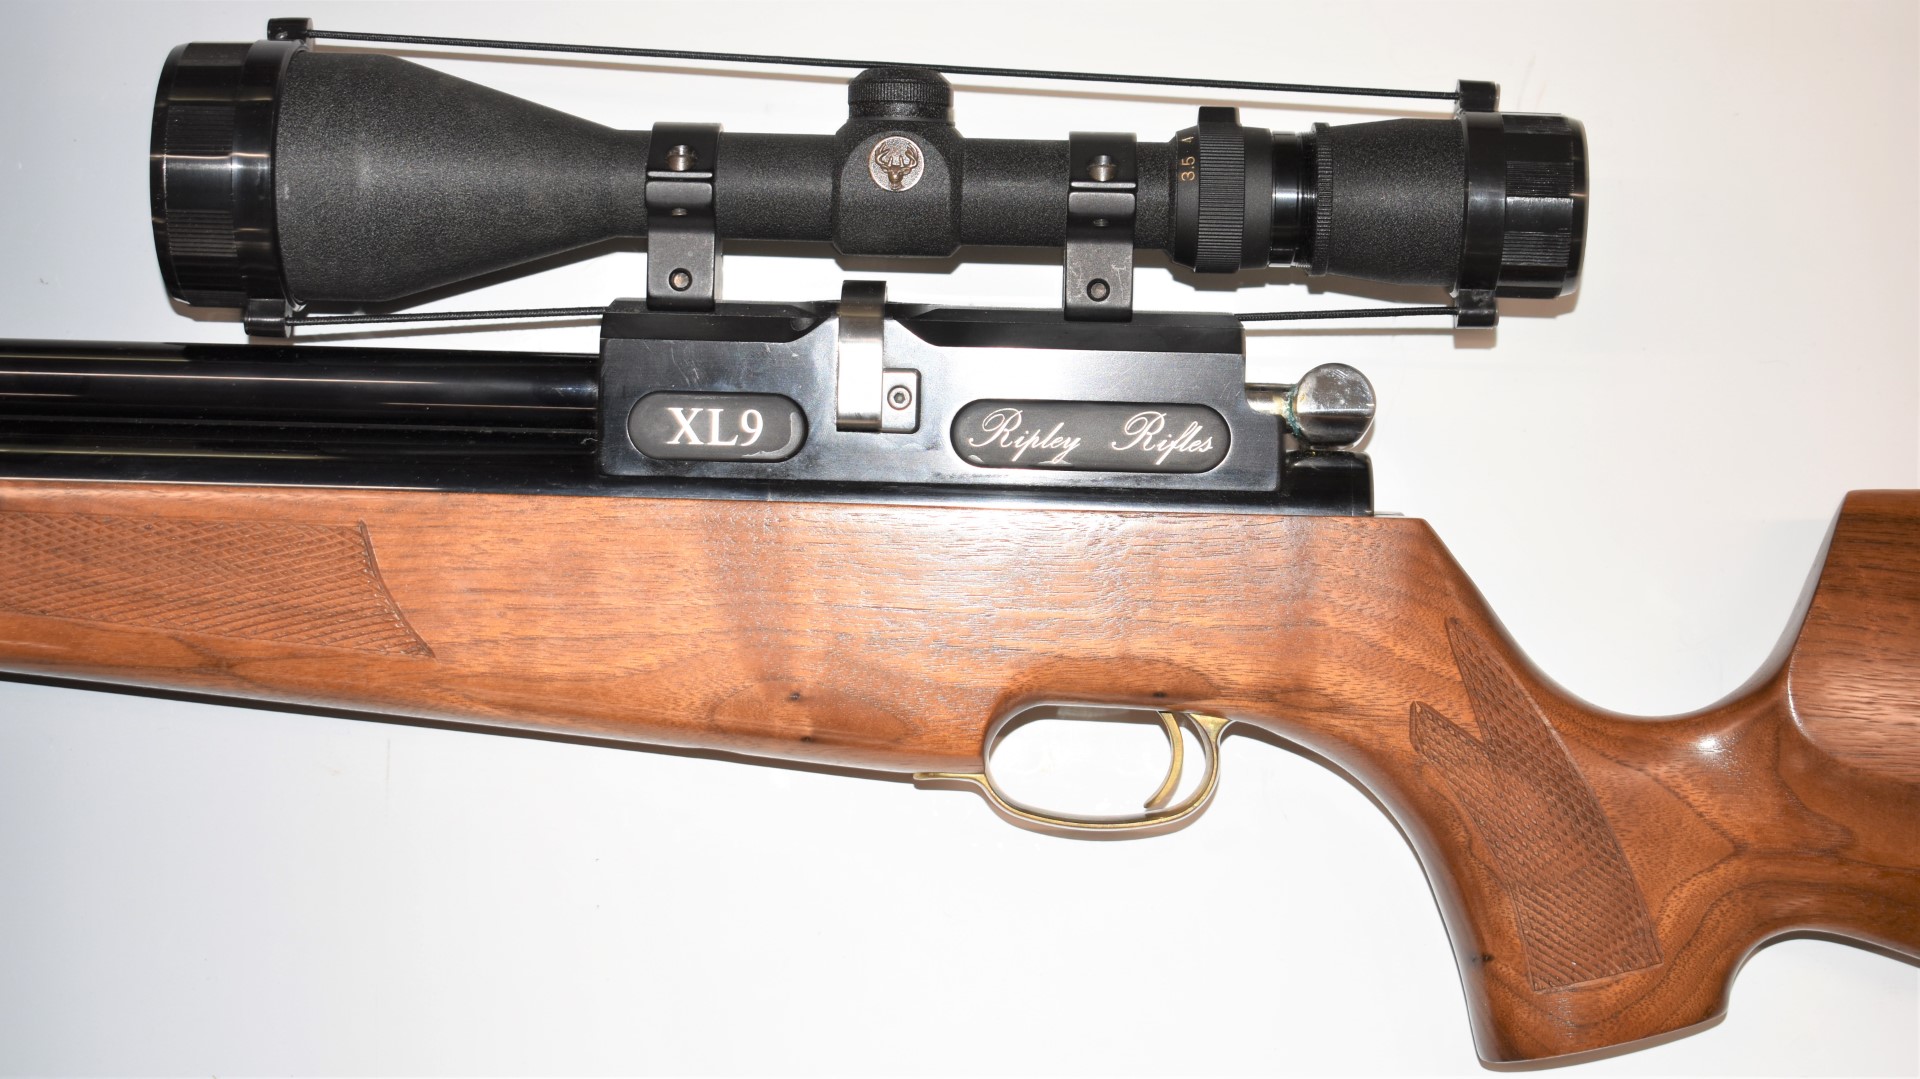 Ripley Rifles XL9 .22 PCP air rifle with nine shot magazine, chequered semi-pistol grip and - Image 9 of 10